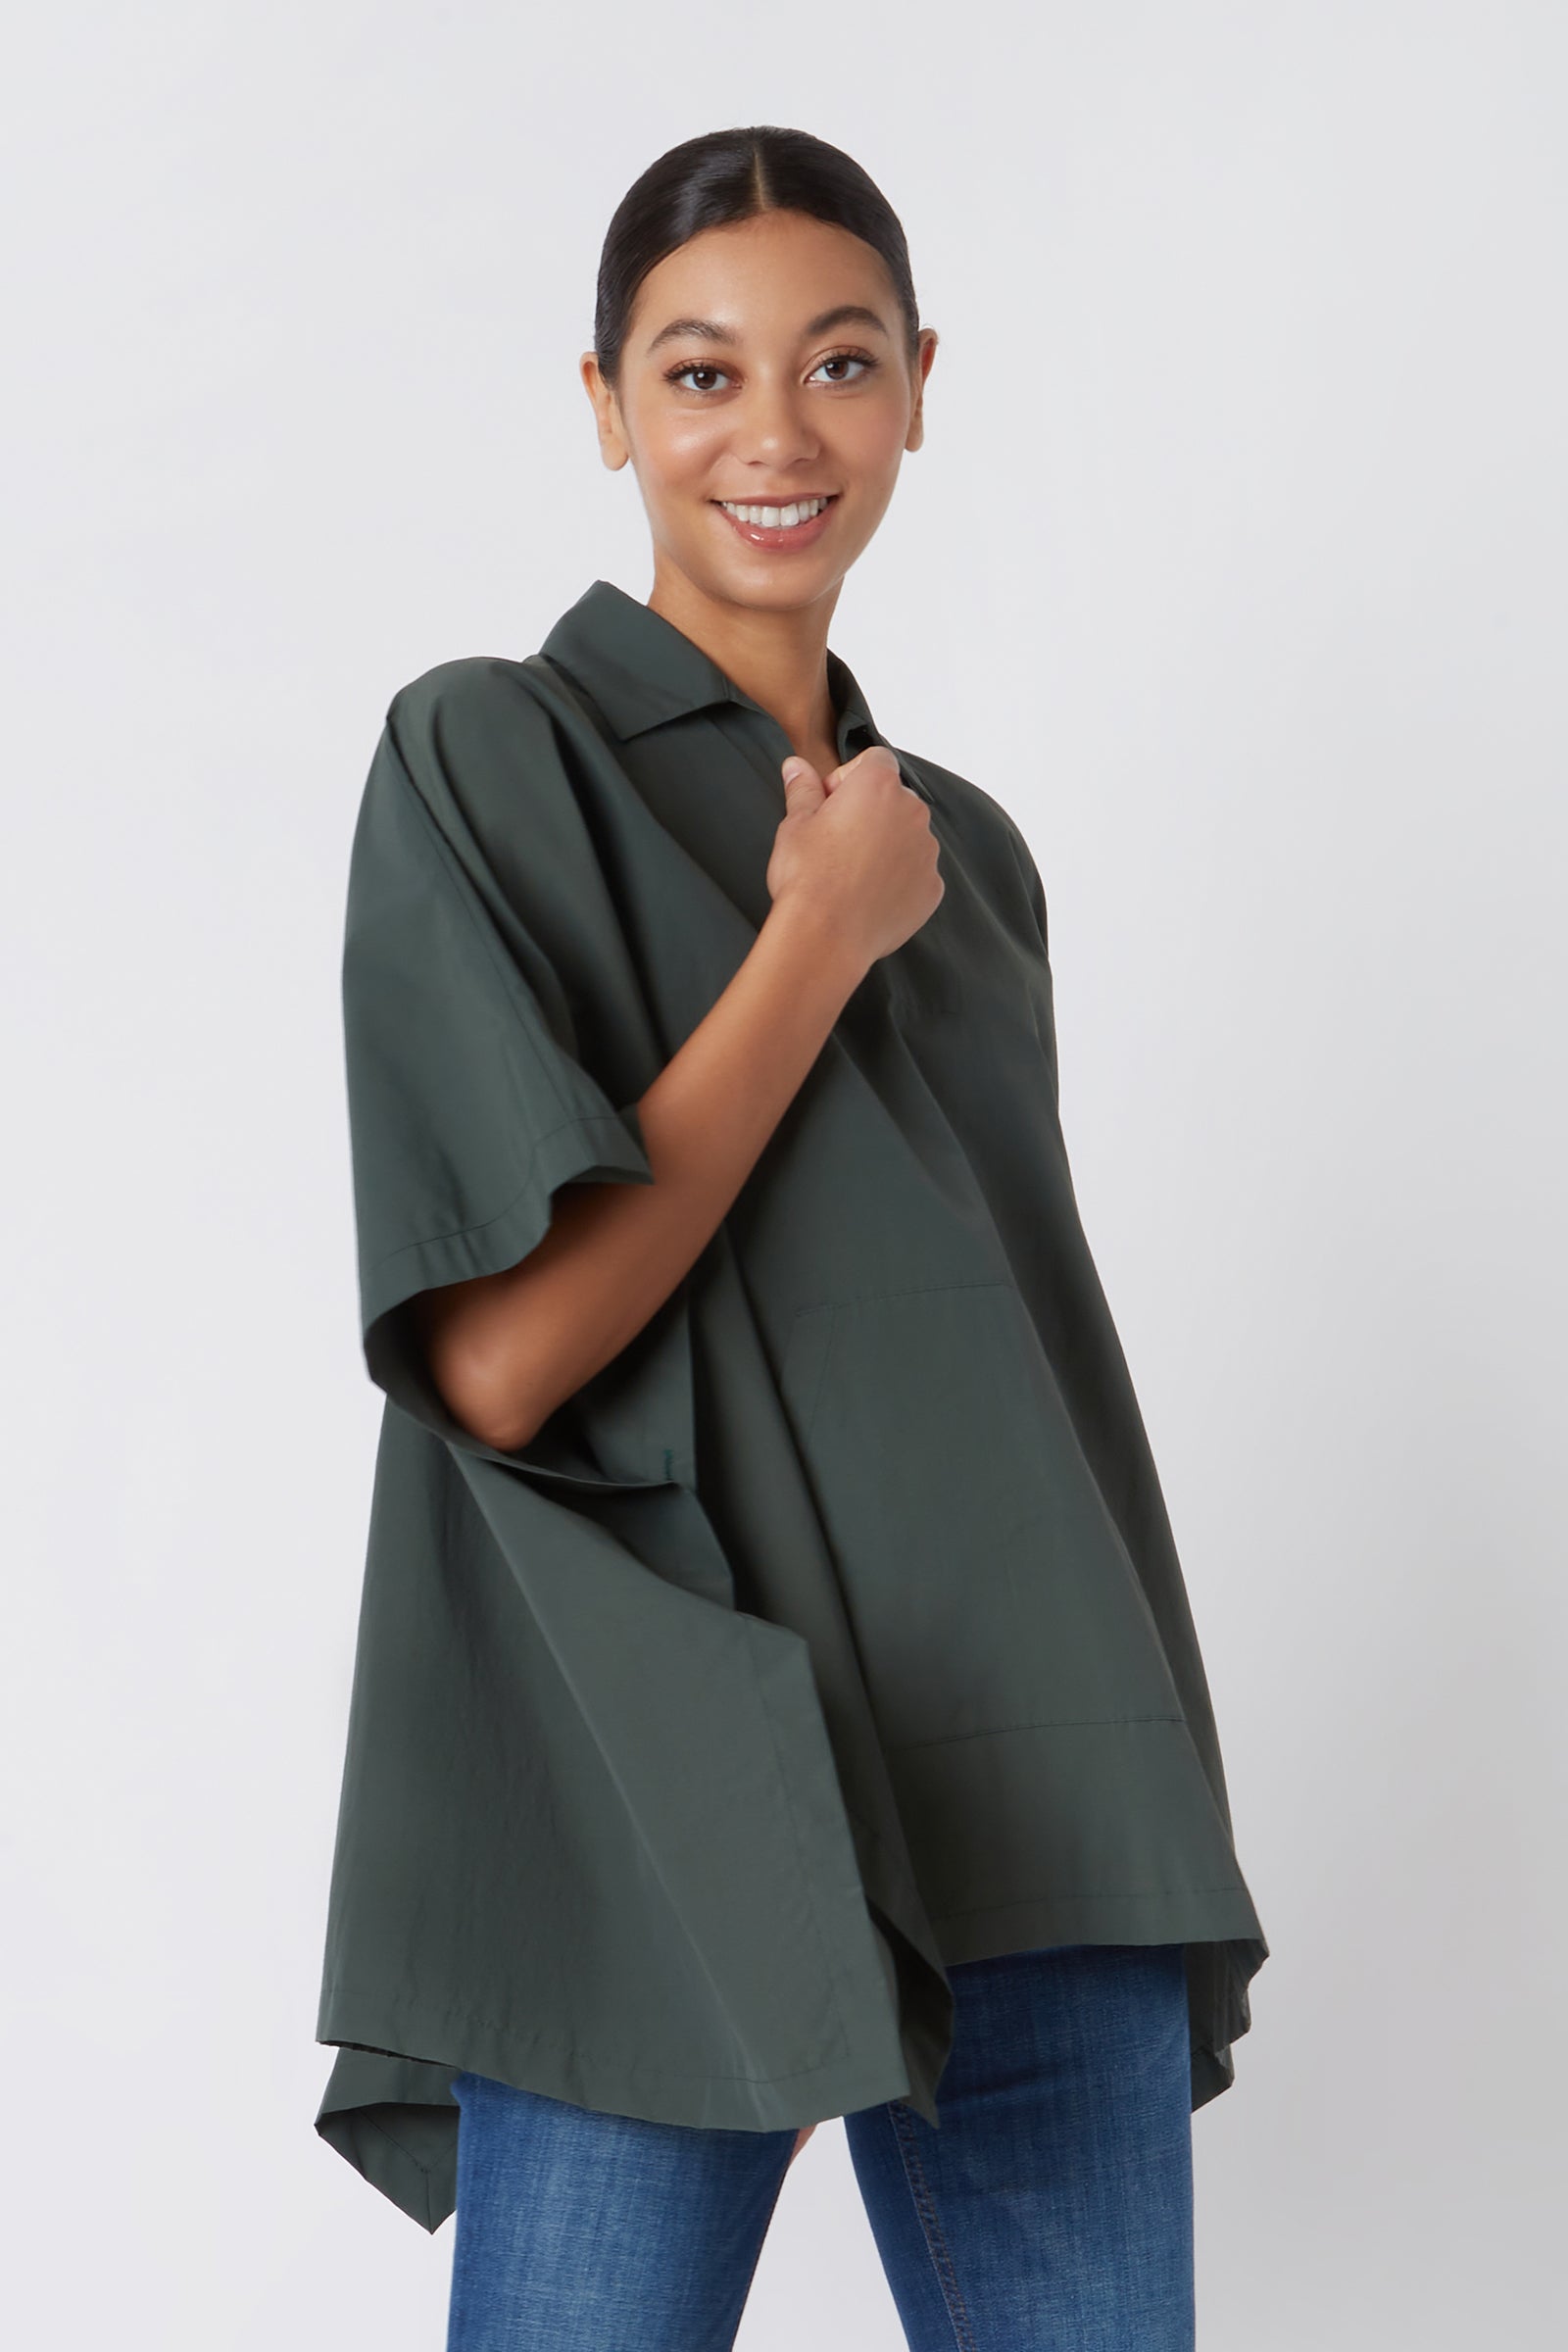 Kal Rieman Pocket Poncho in Loden on Model Hand on Shirt Cropped Front View